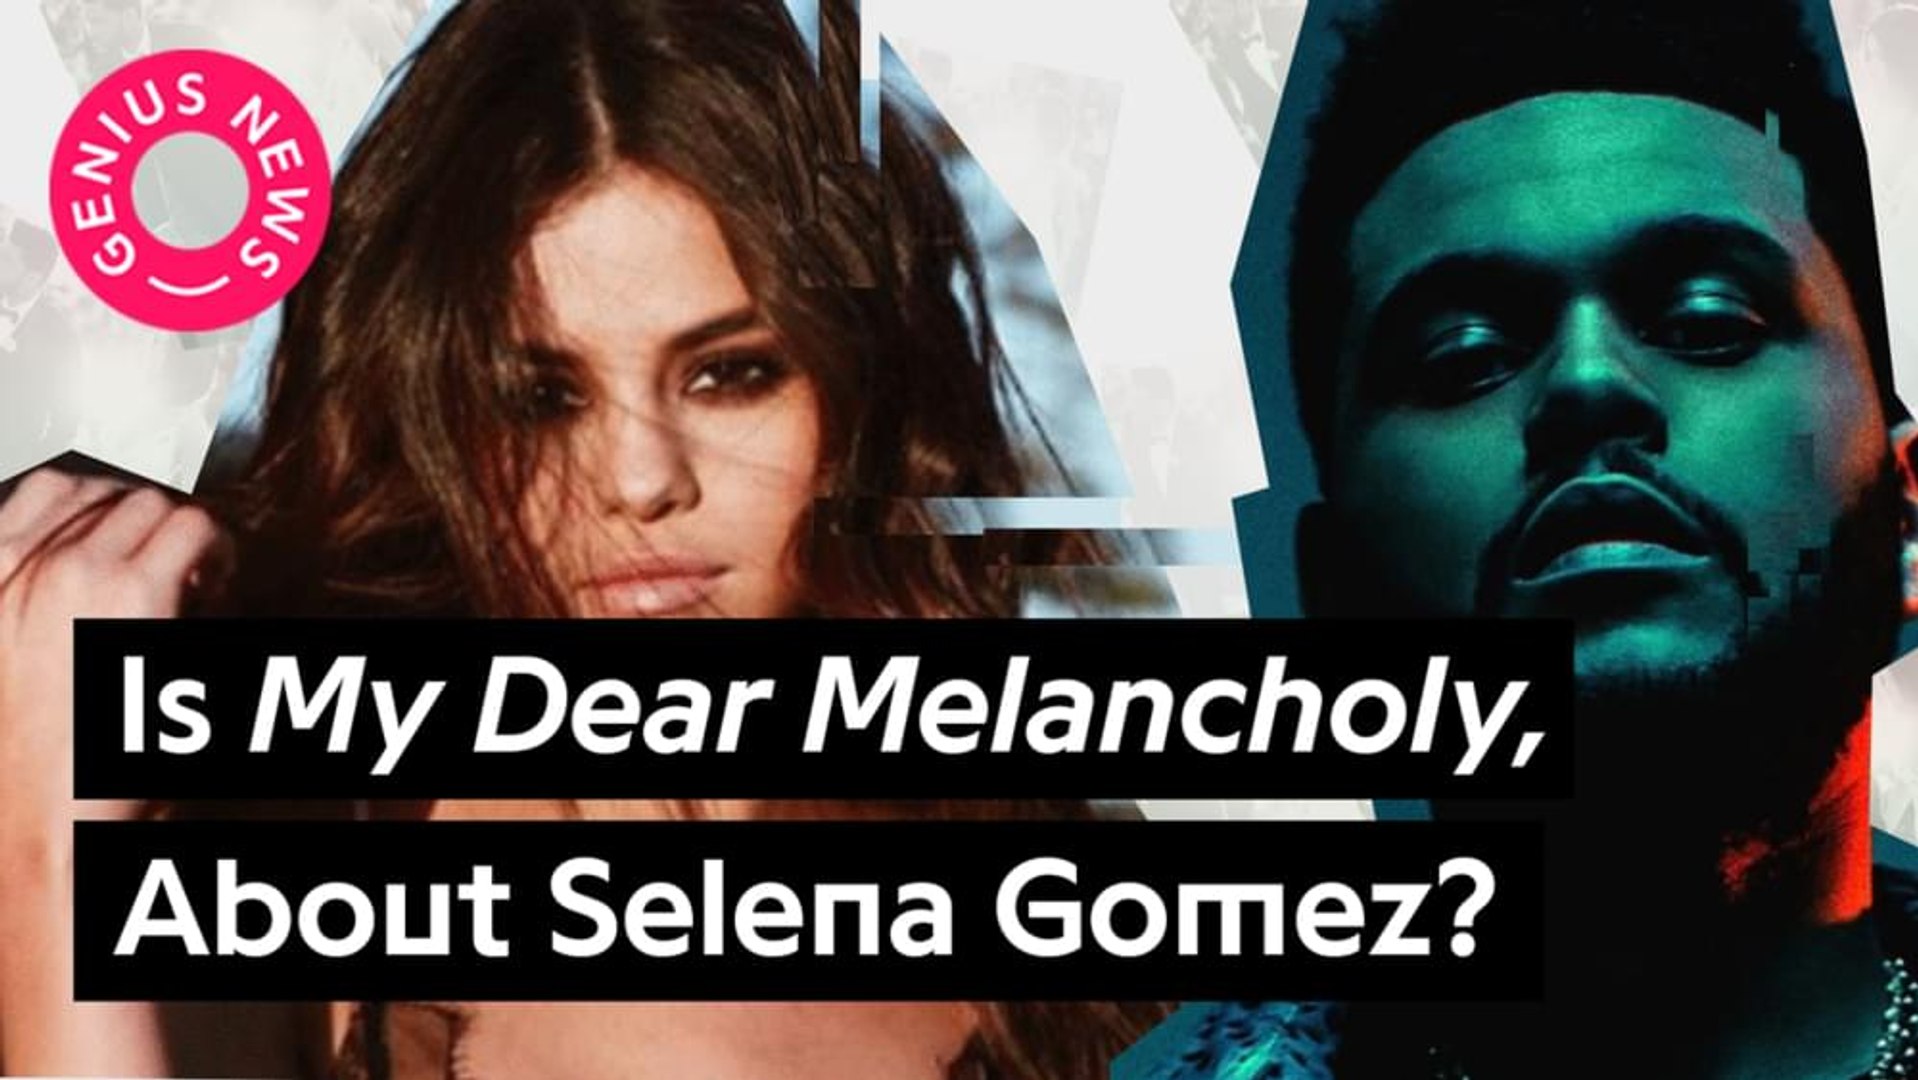 The Weeknd’s “Call Out My Name” & “Privilege” Seem To Be About His Relationship With Selena Gome